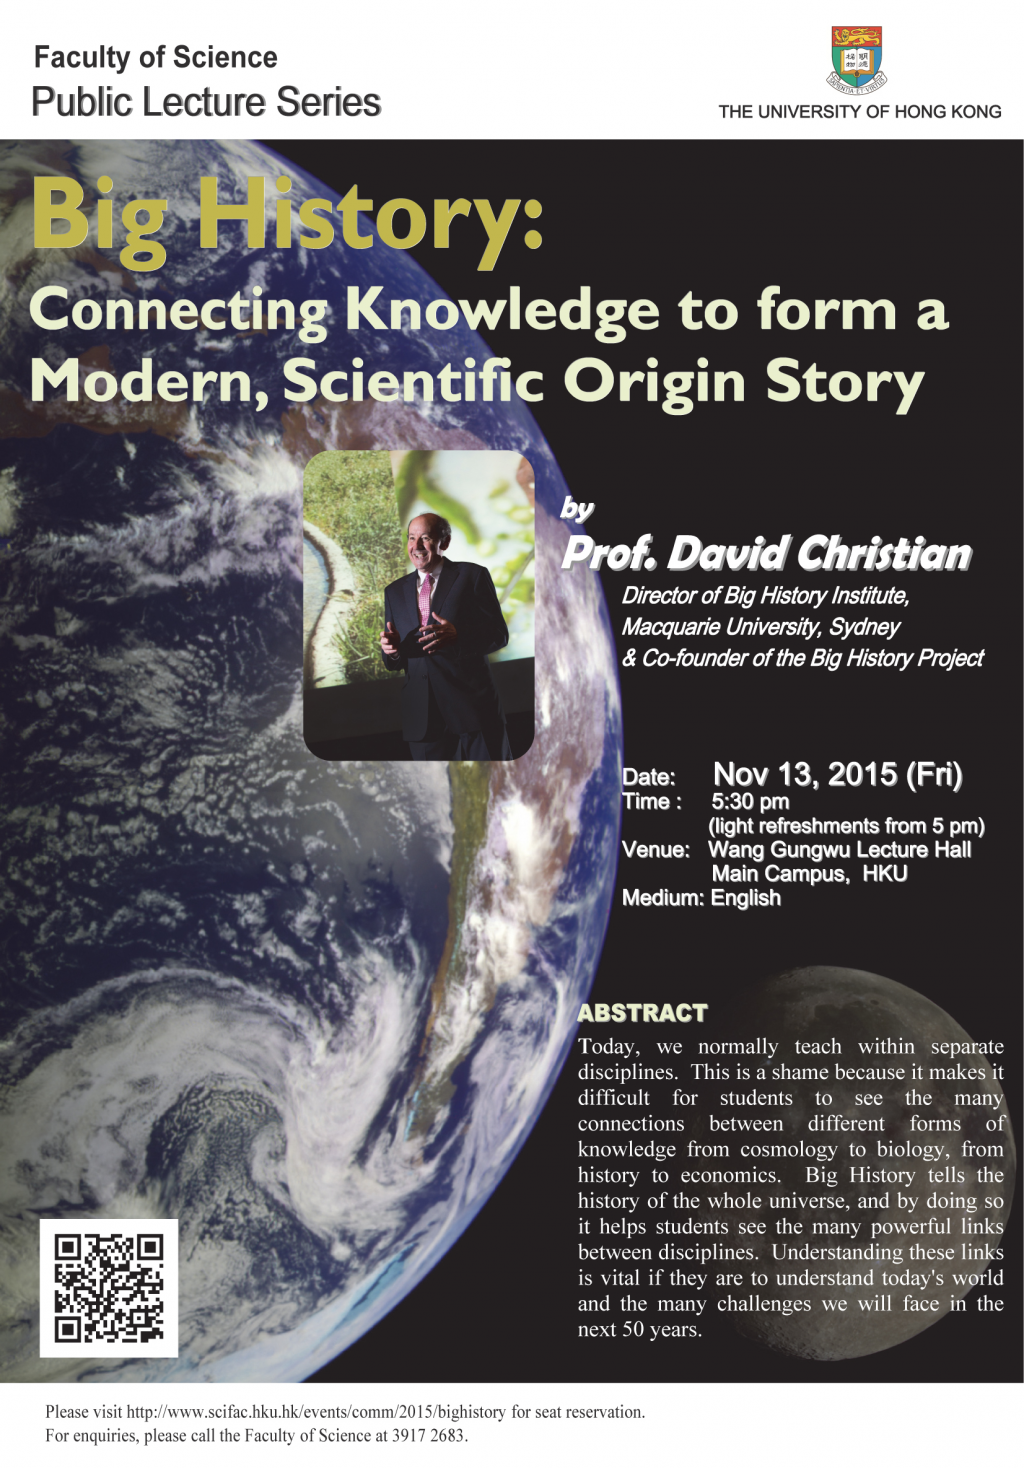 Public Lecture: Big History: Connecting Knowledge to form a Modern, Scientific Origin Story